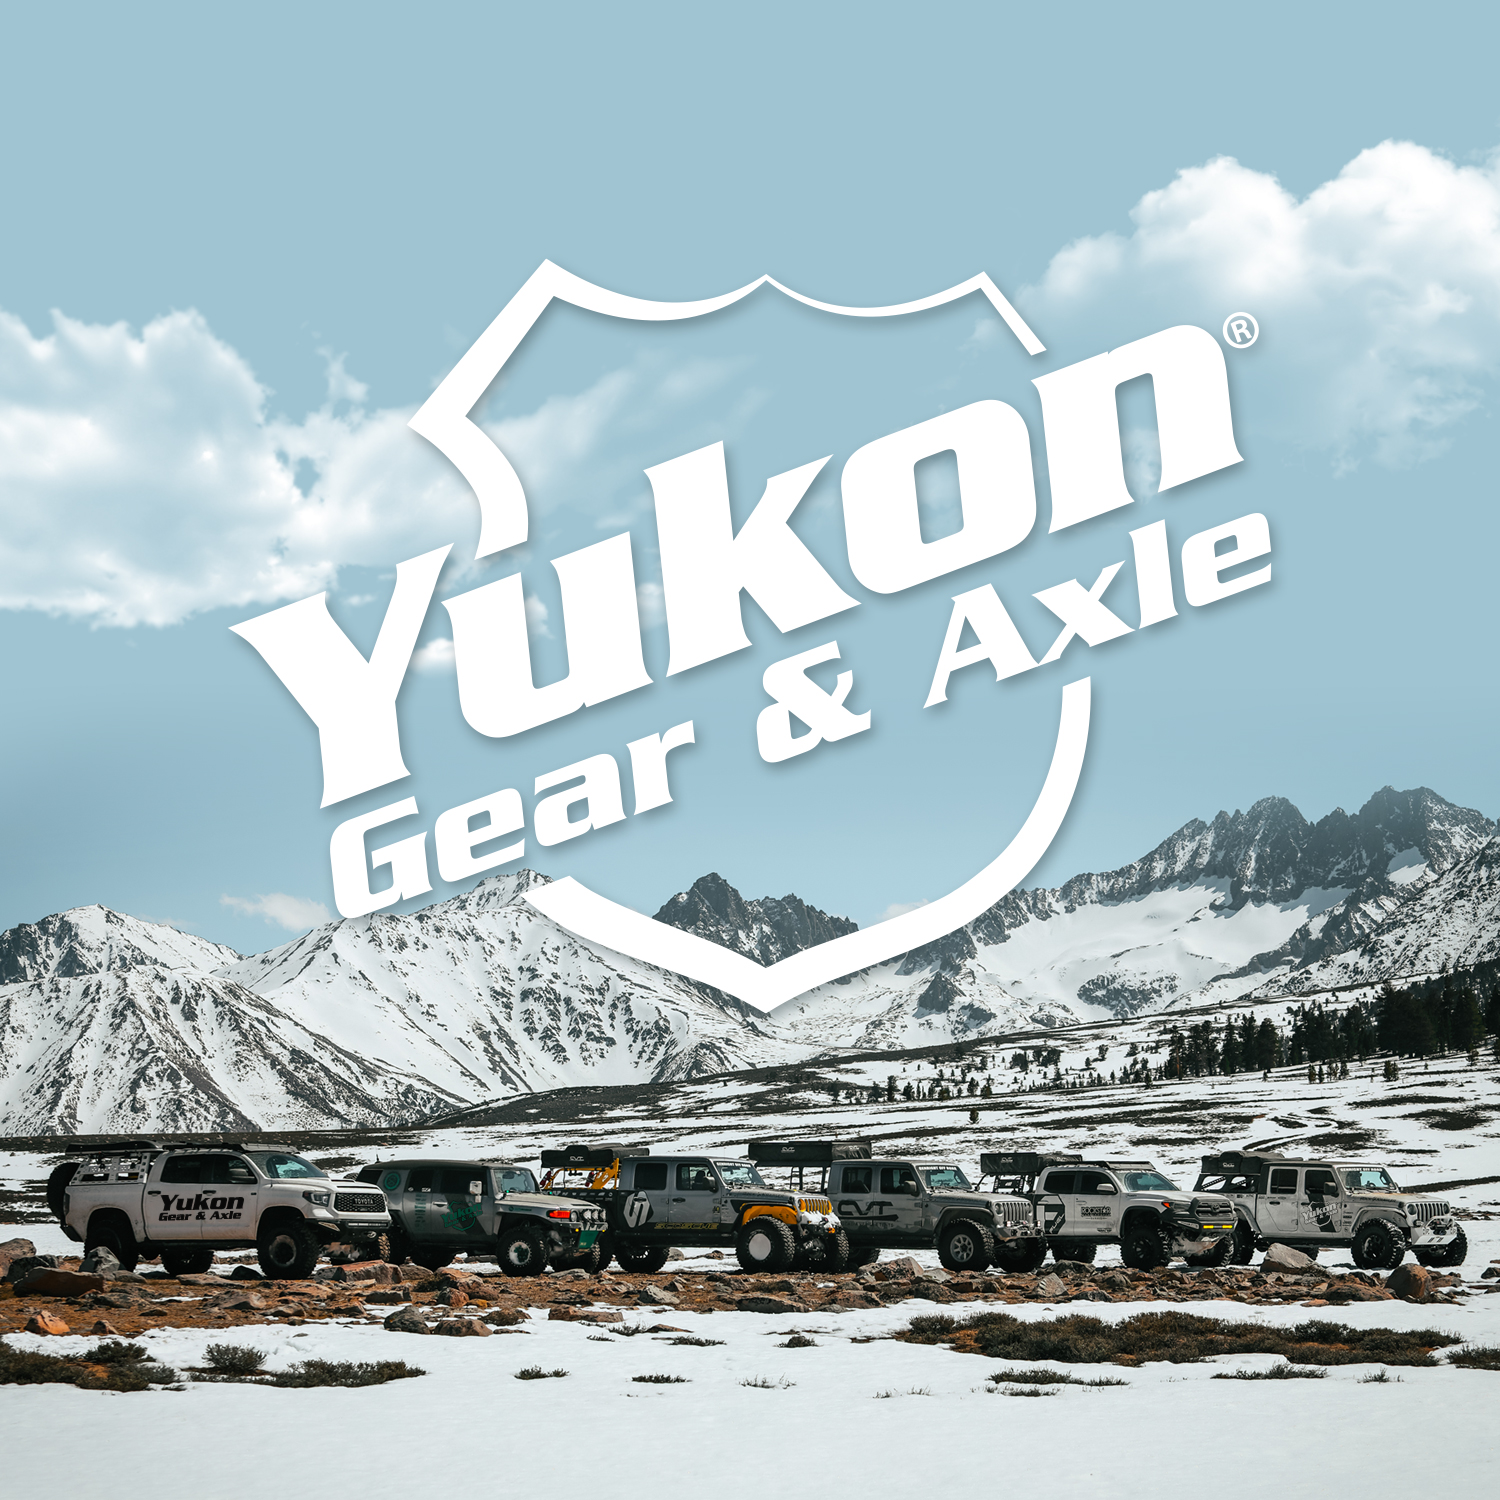 Yukon Pinion install kit for Toyota 7.5" IFS differential (four cylinder only) 